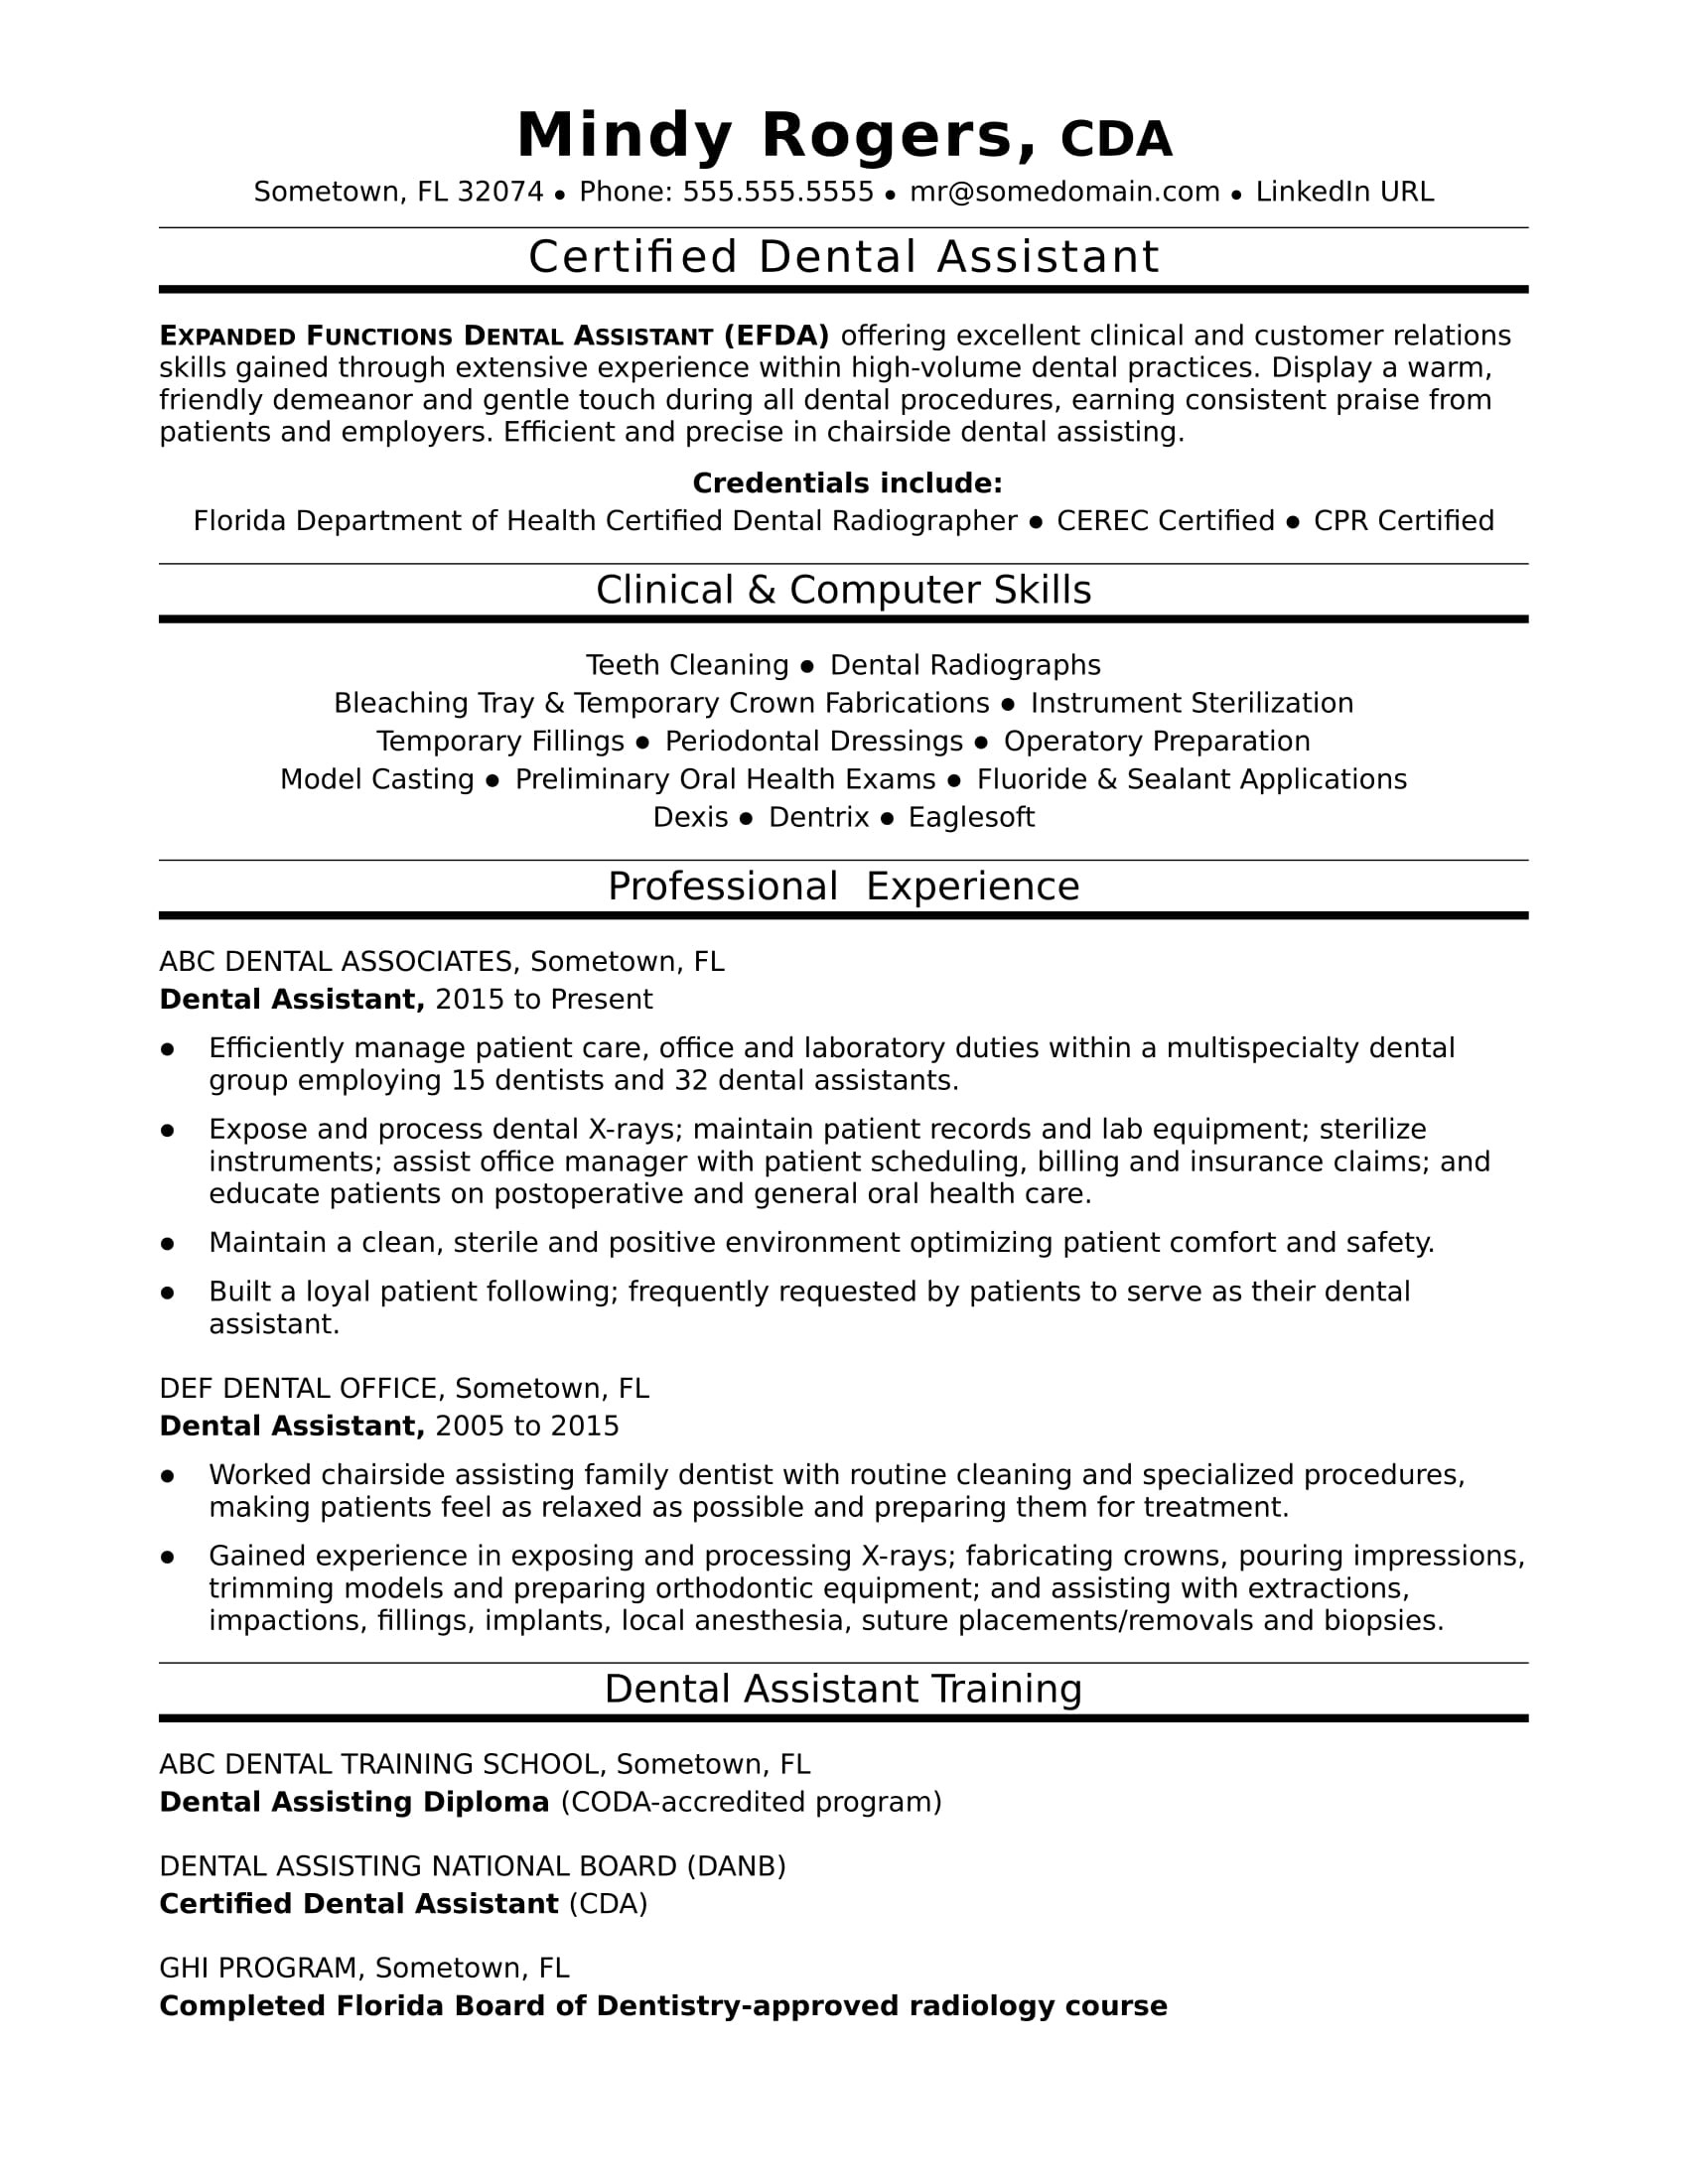 Dental assistant and Receptionist Resume Sample Dental assistant Resume Monster.com